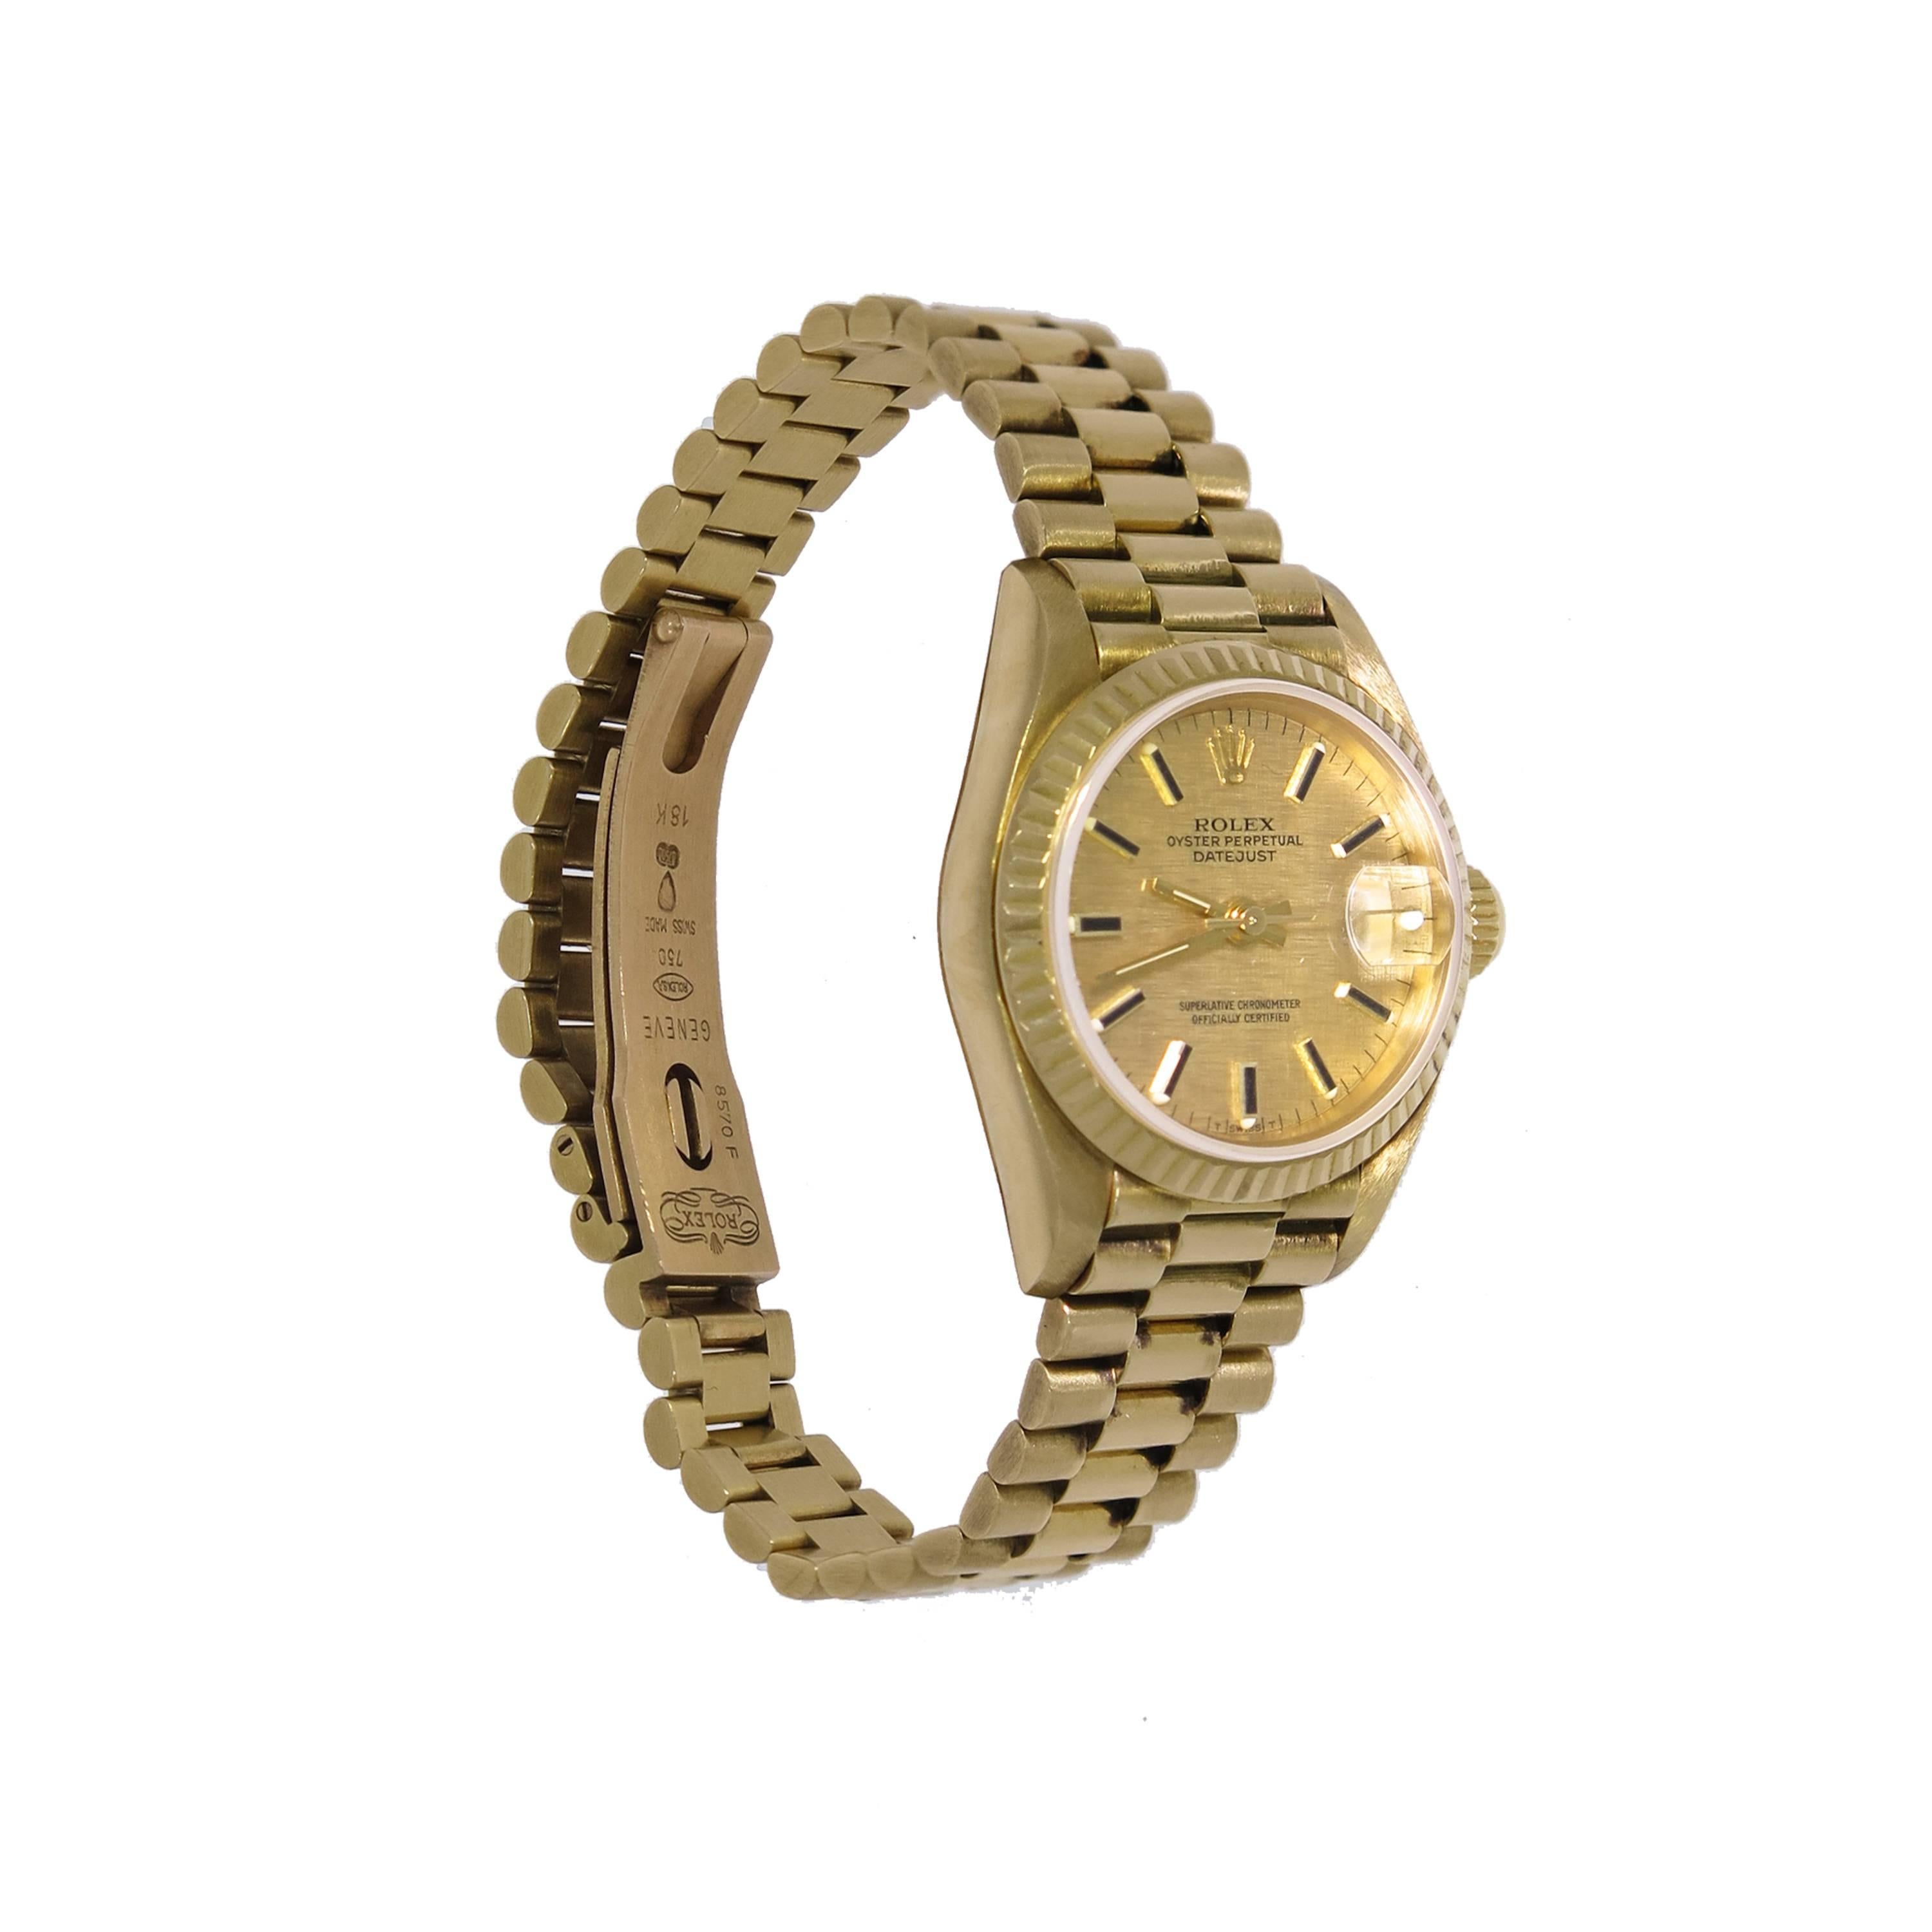 This classic Rolex President lady's wristwatch known to be worn by many world leaders, is crafted in 18k yellow gold. This timepiece features a self-winding movement with indications for the Hours, Minutes, Seconds and Date. The case measures 26mm